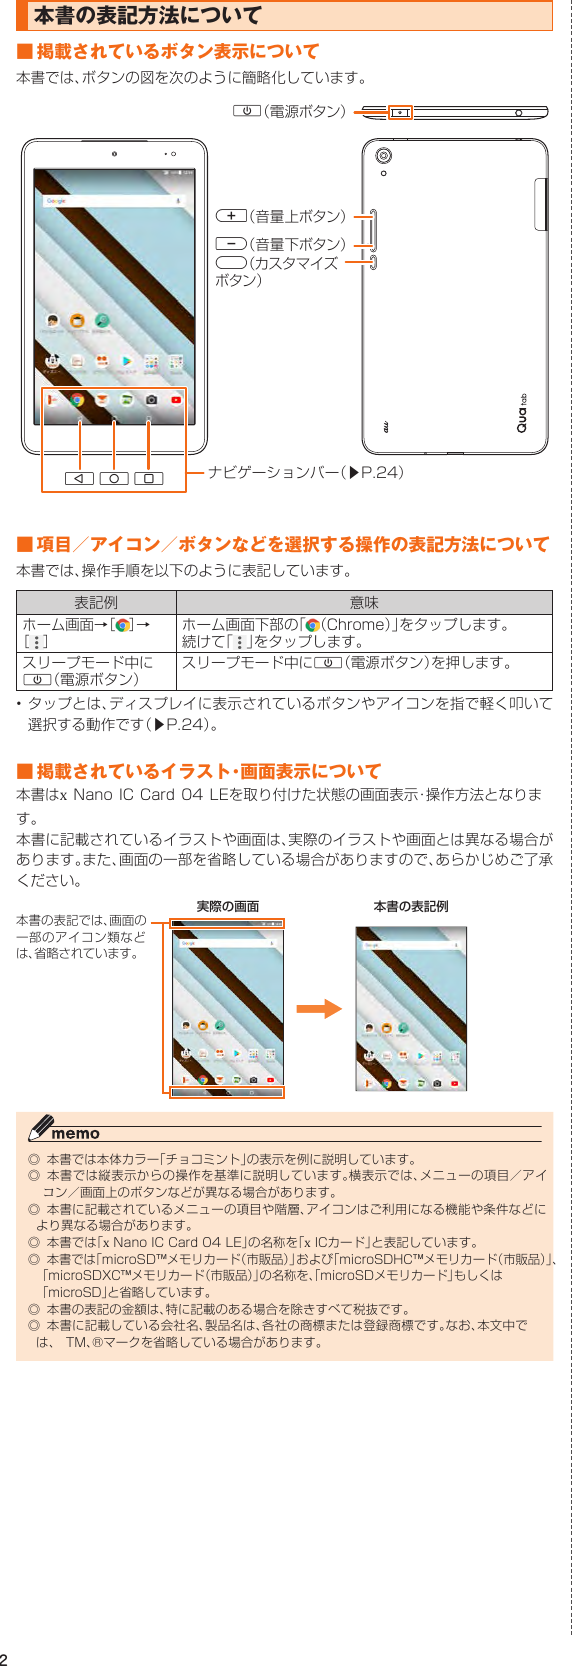 Page 3 of Kyocera FA51 Tablet User Manual part 2